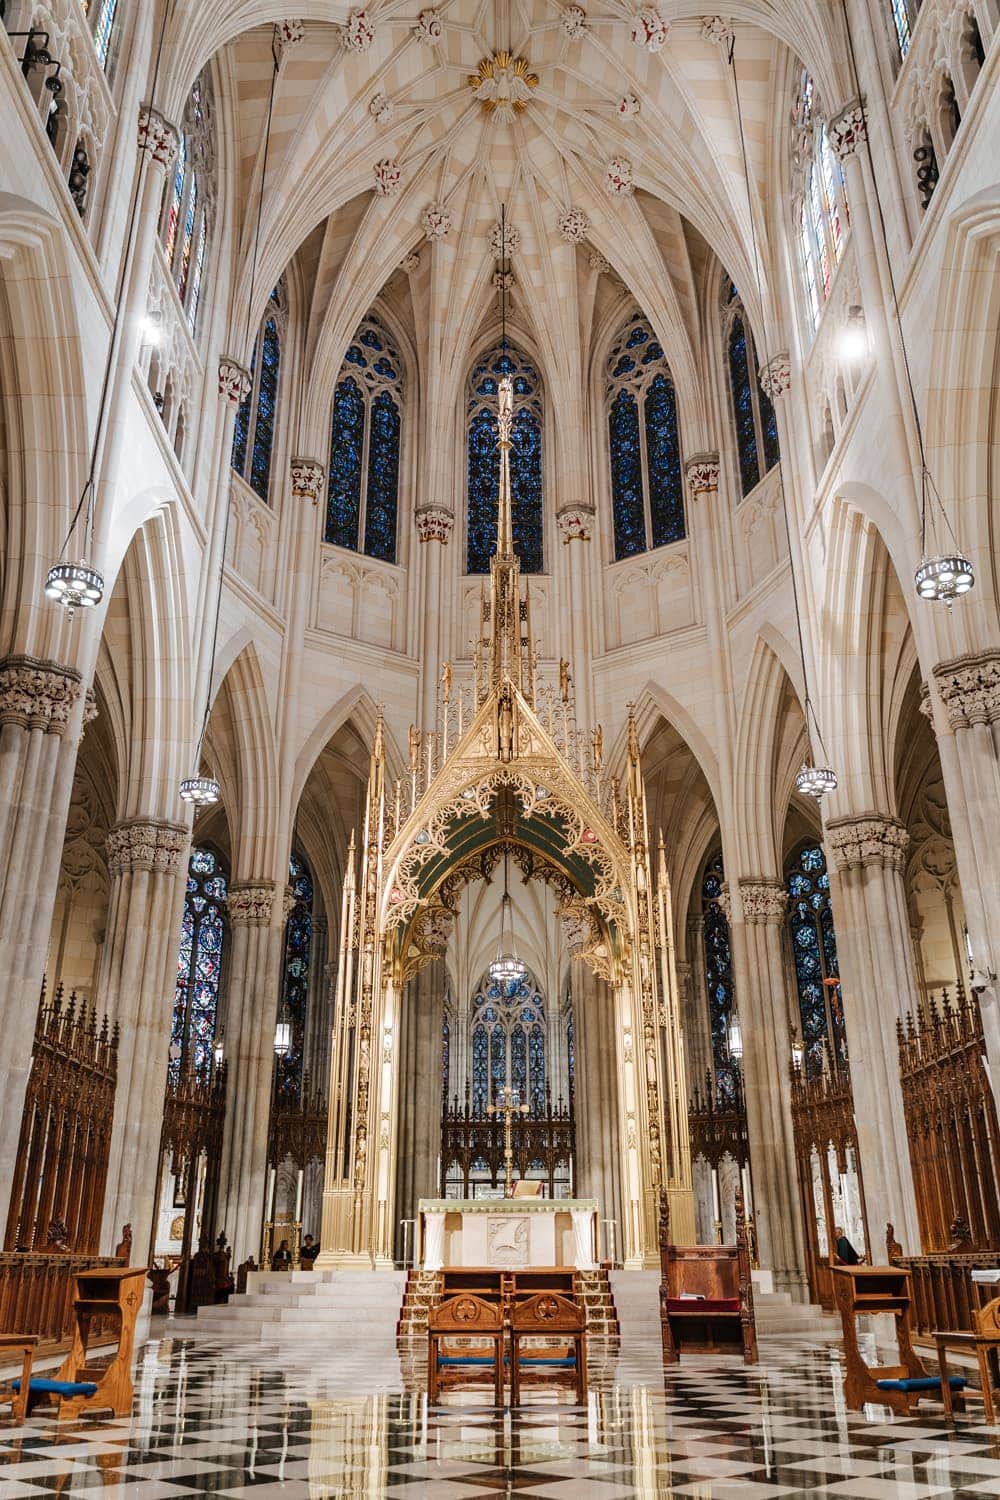 St. Patrick's Cathedral interior, New York